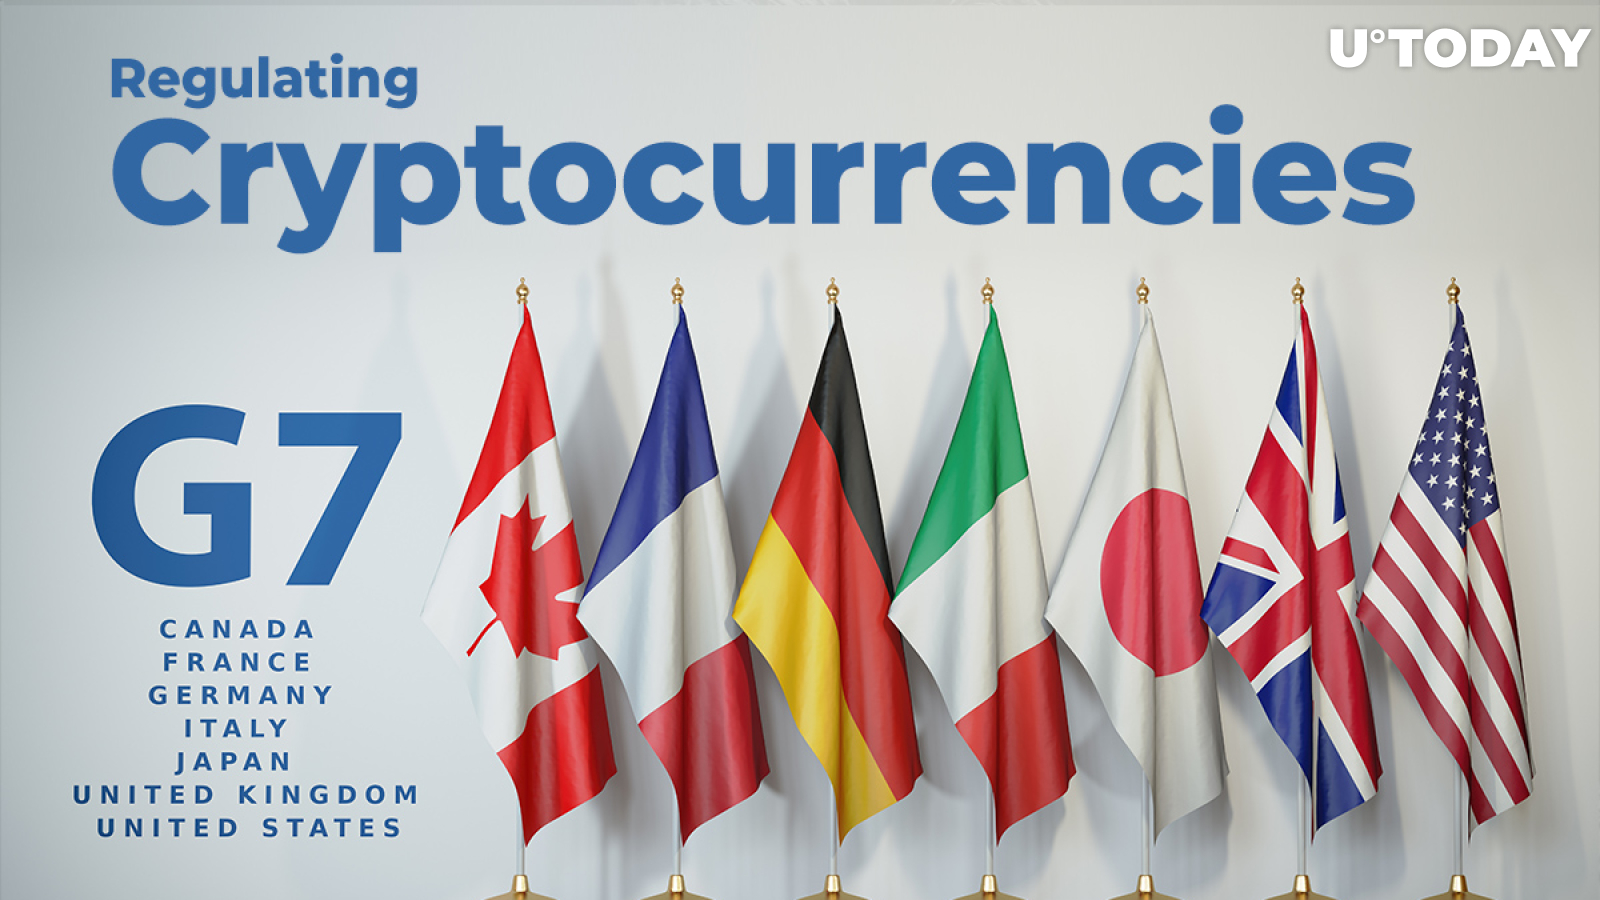 BREAKING: G7 Finance Ministers Support Regulating Cryptocurrencies